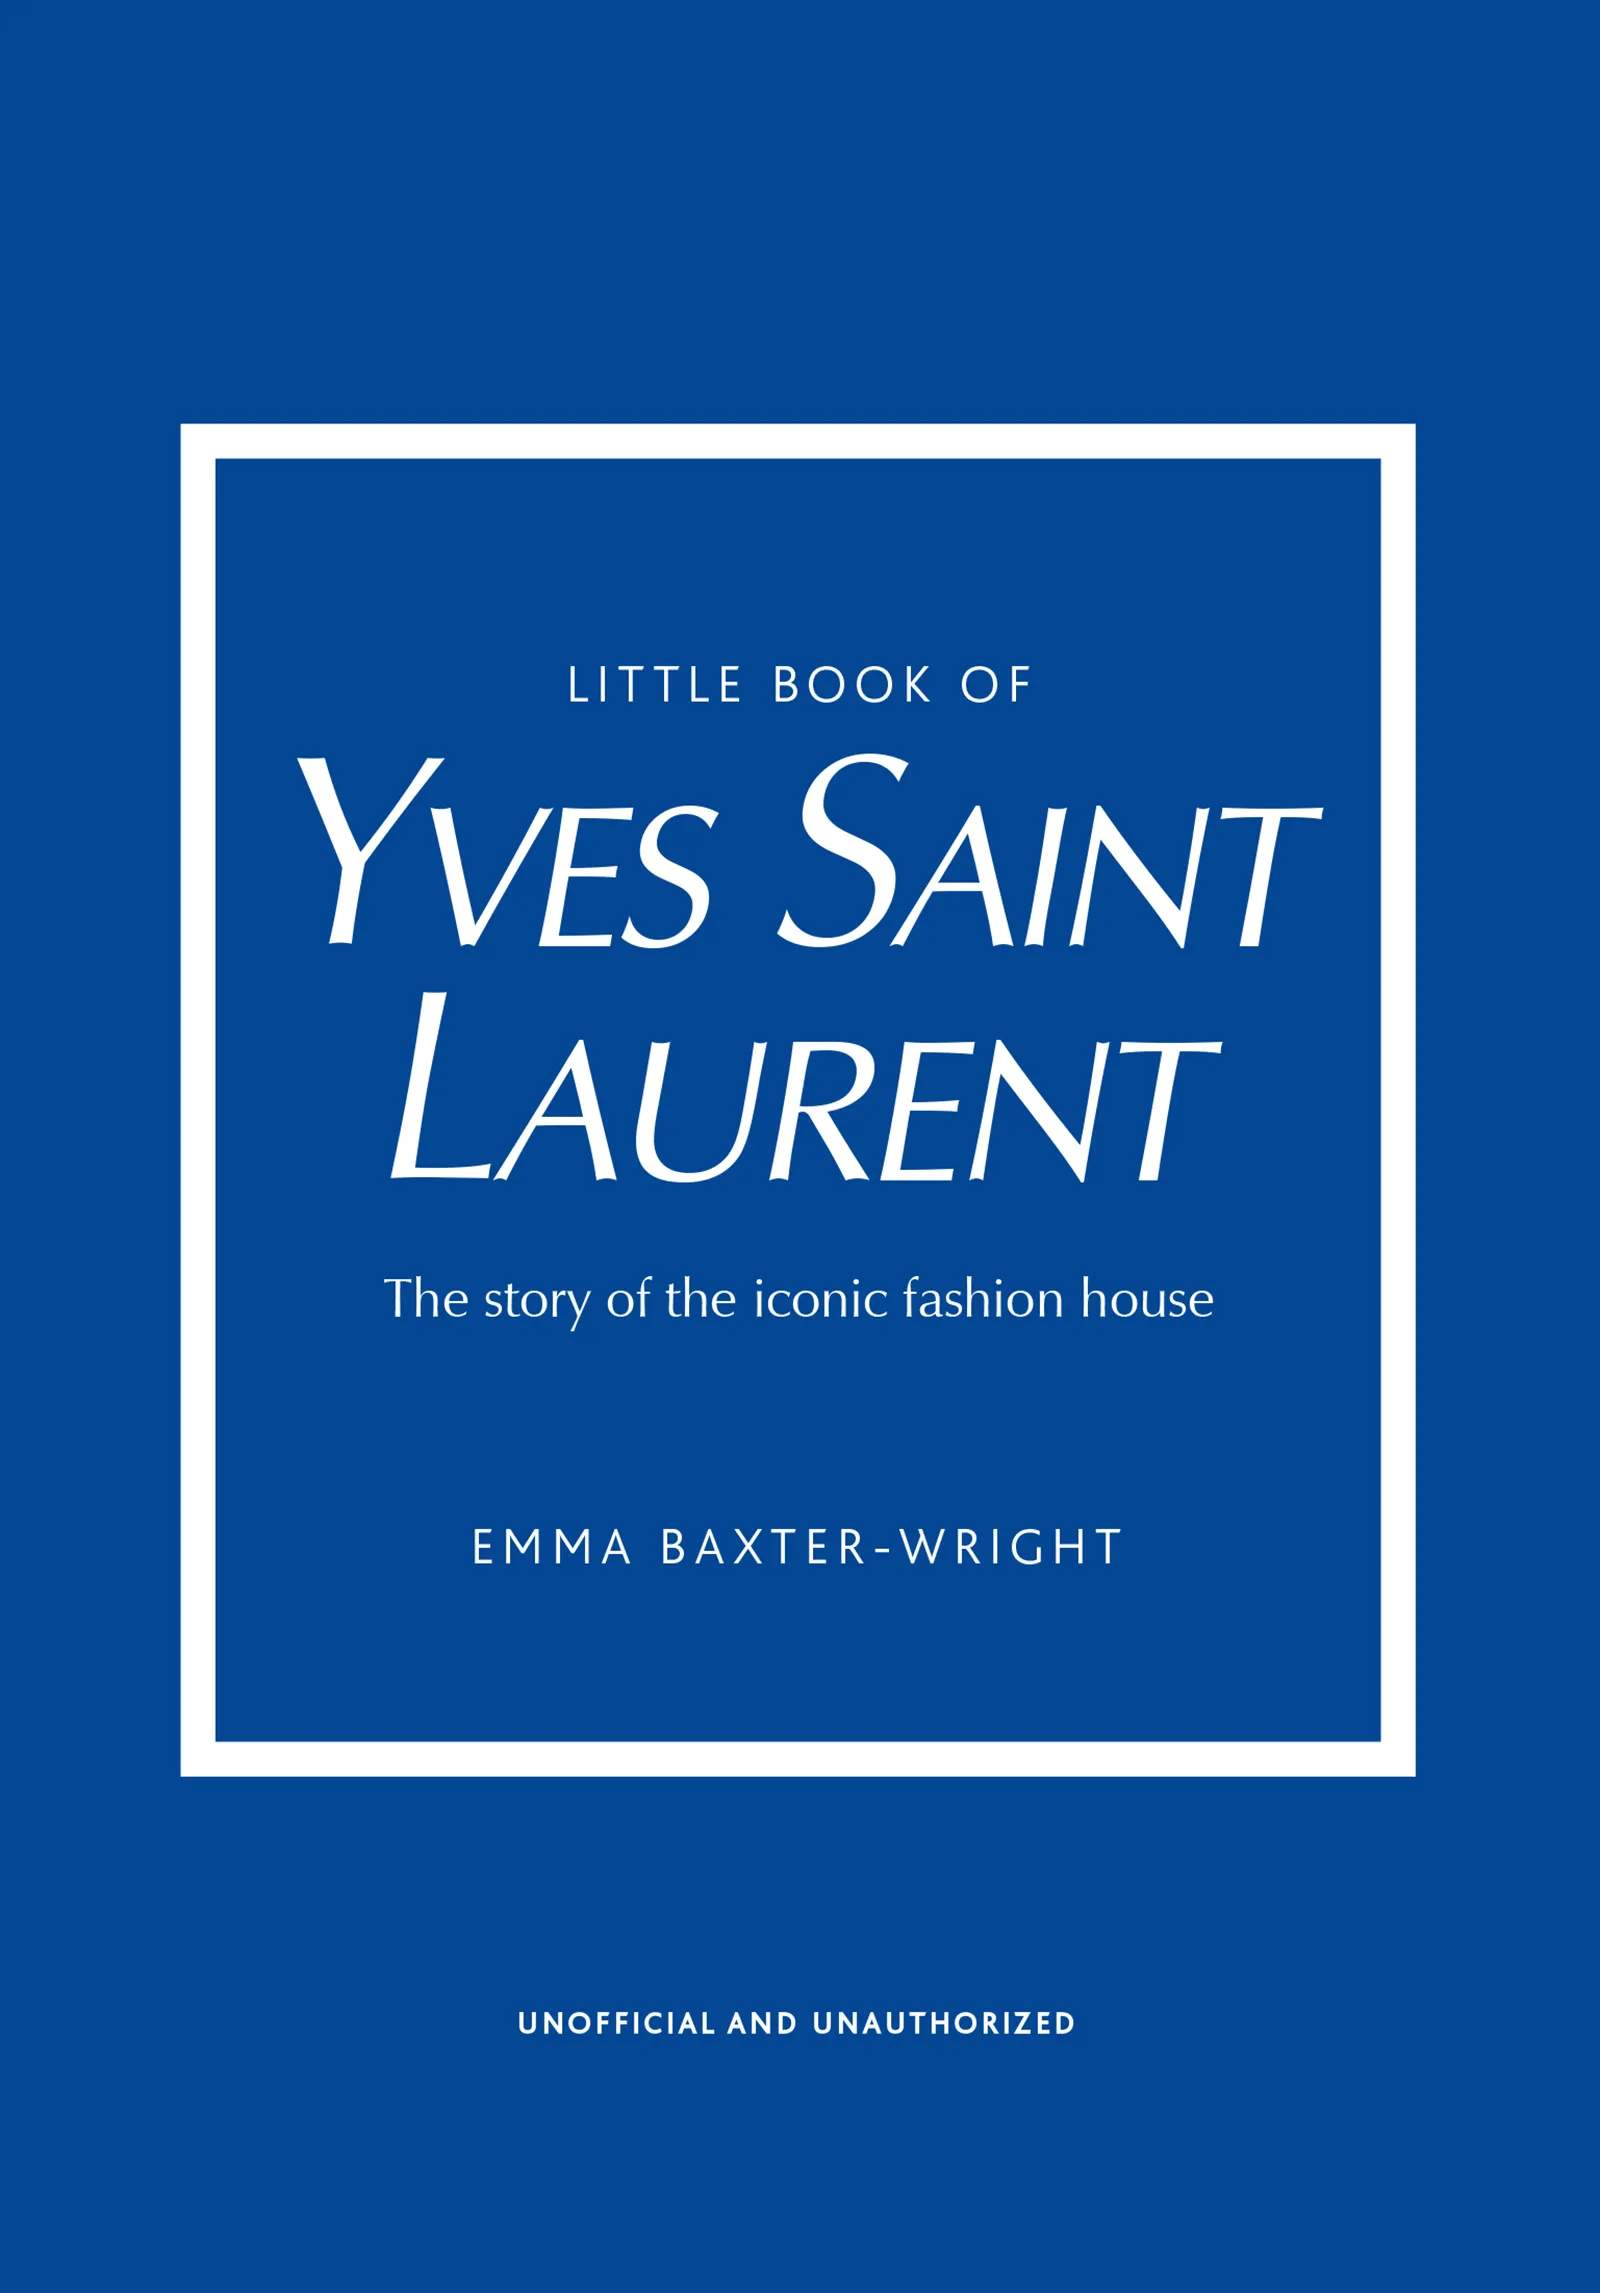 Little Book of Yves Saint Laurent coffee table books